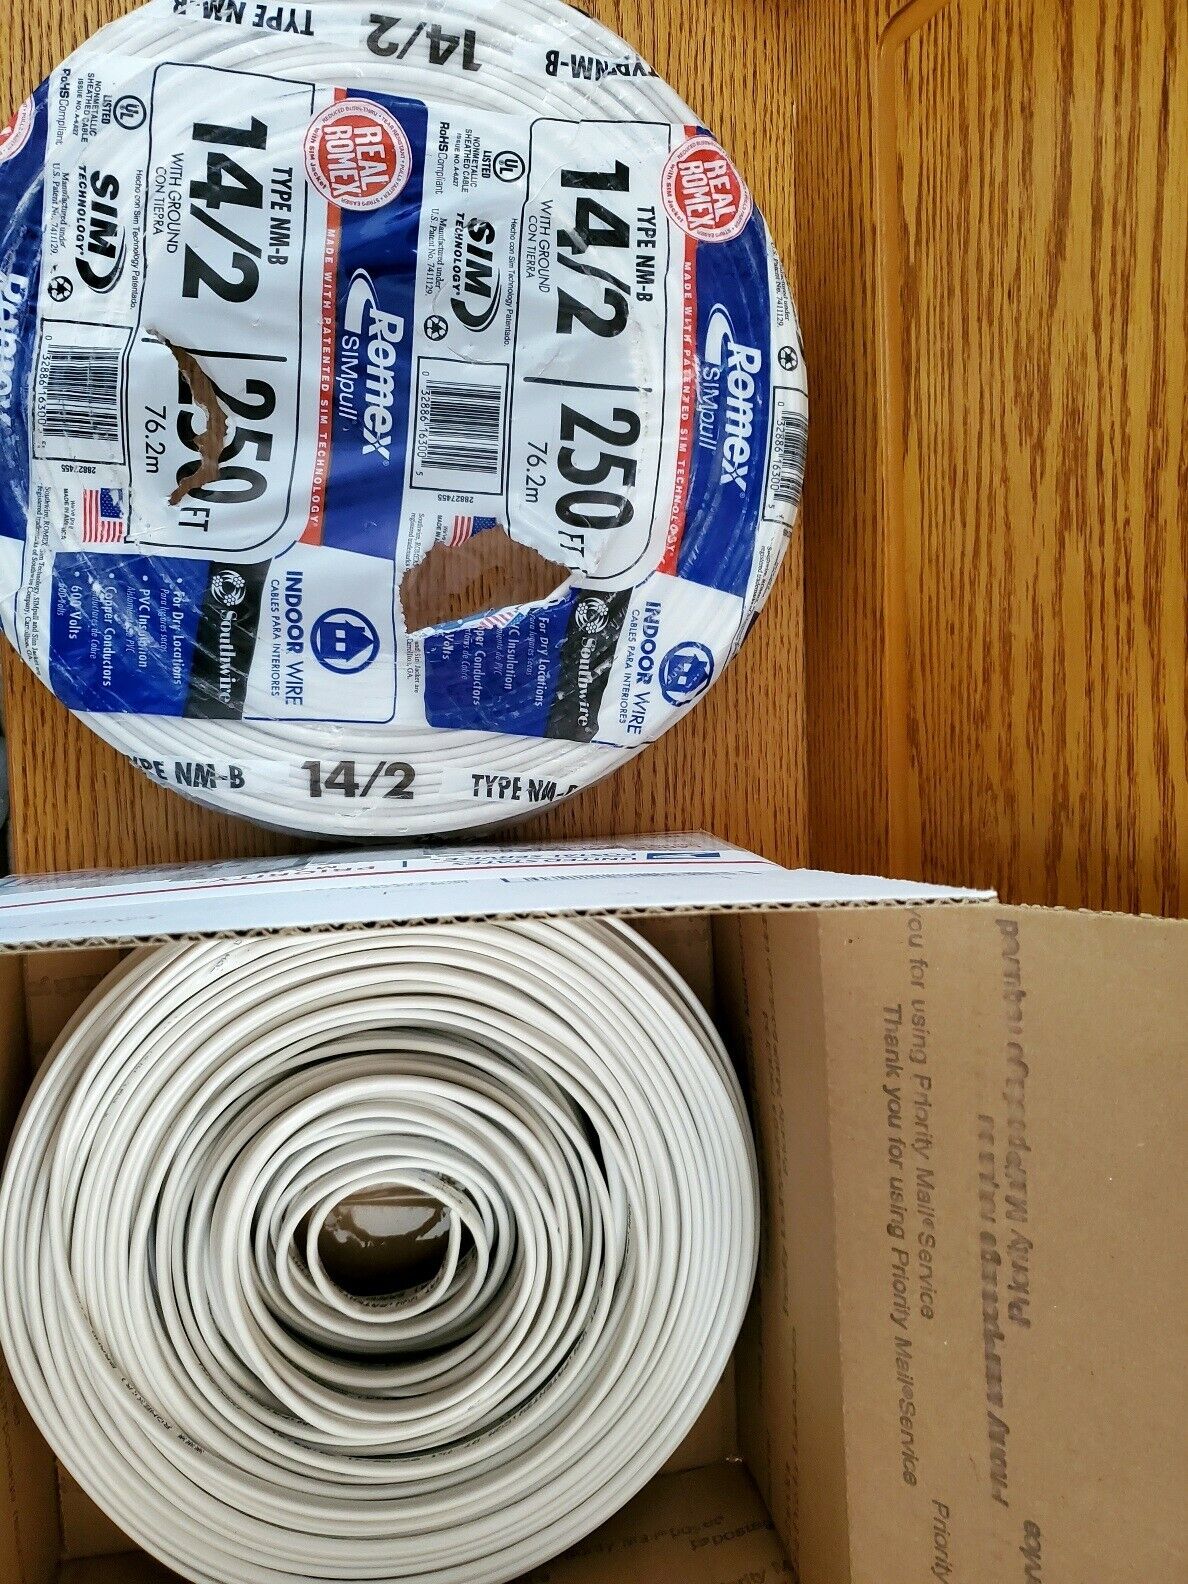 250 Feet 14 2 Electrical Wire (ACTUAL ROMEX BRAND) Ships without packaging.